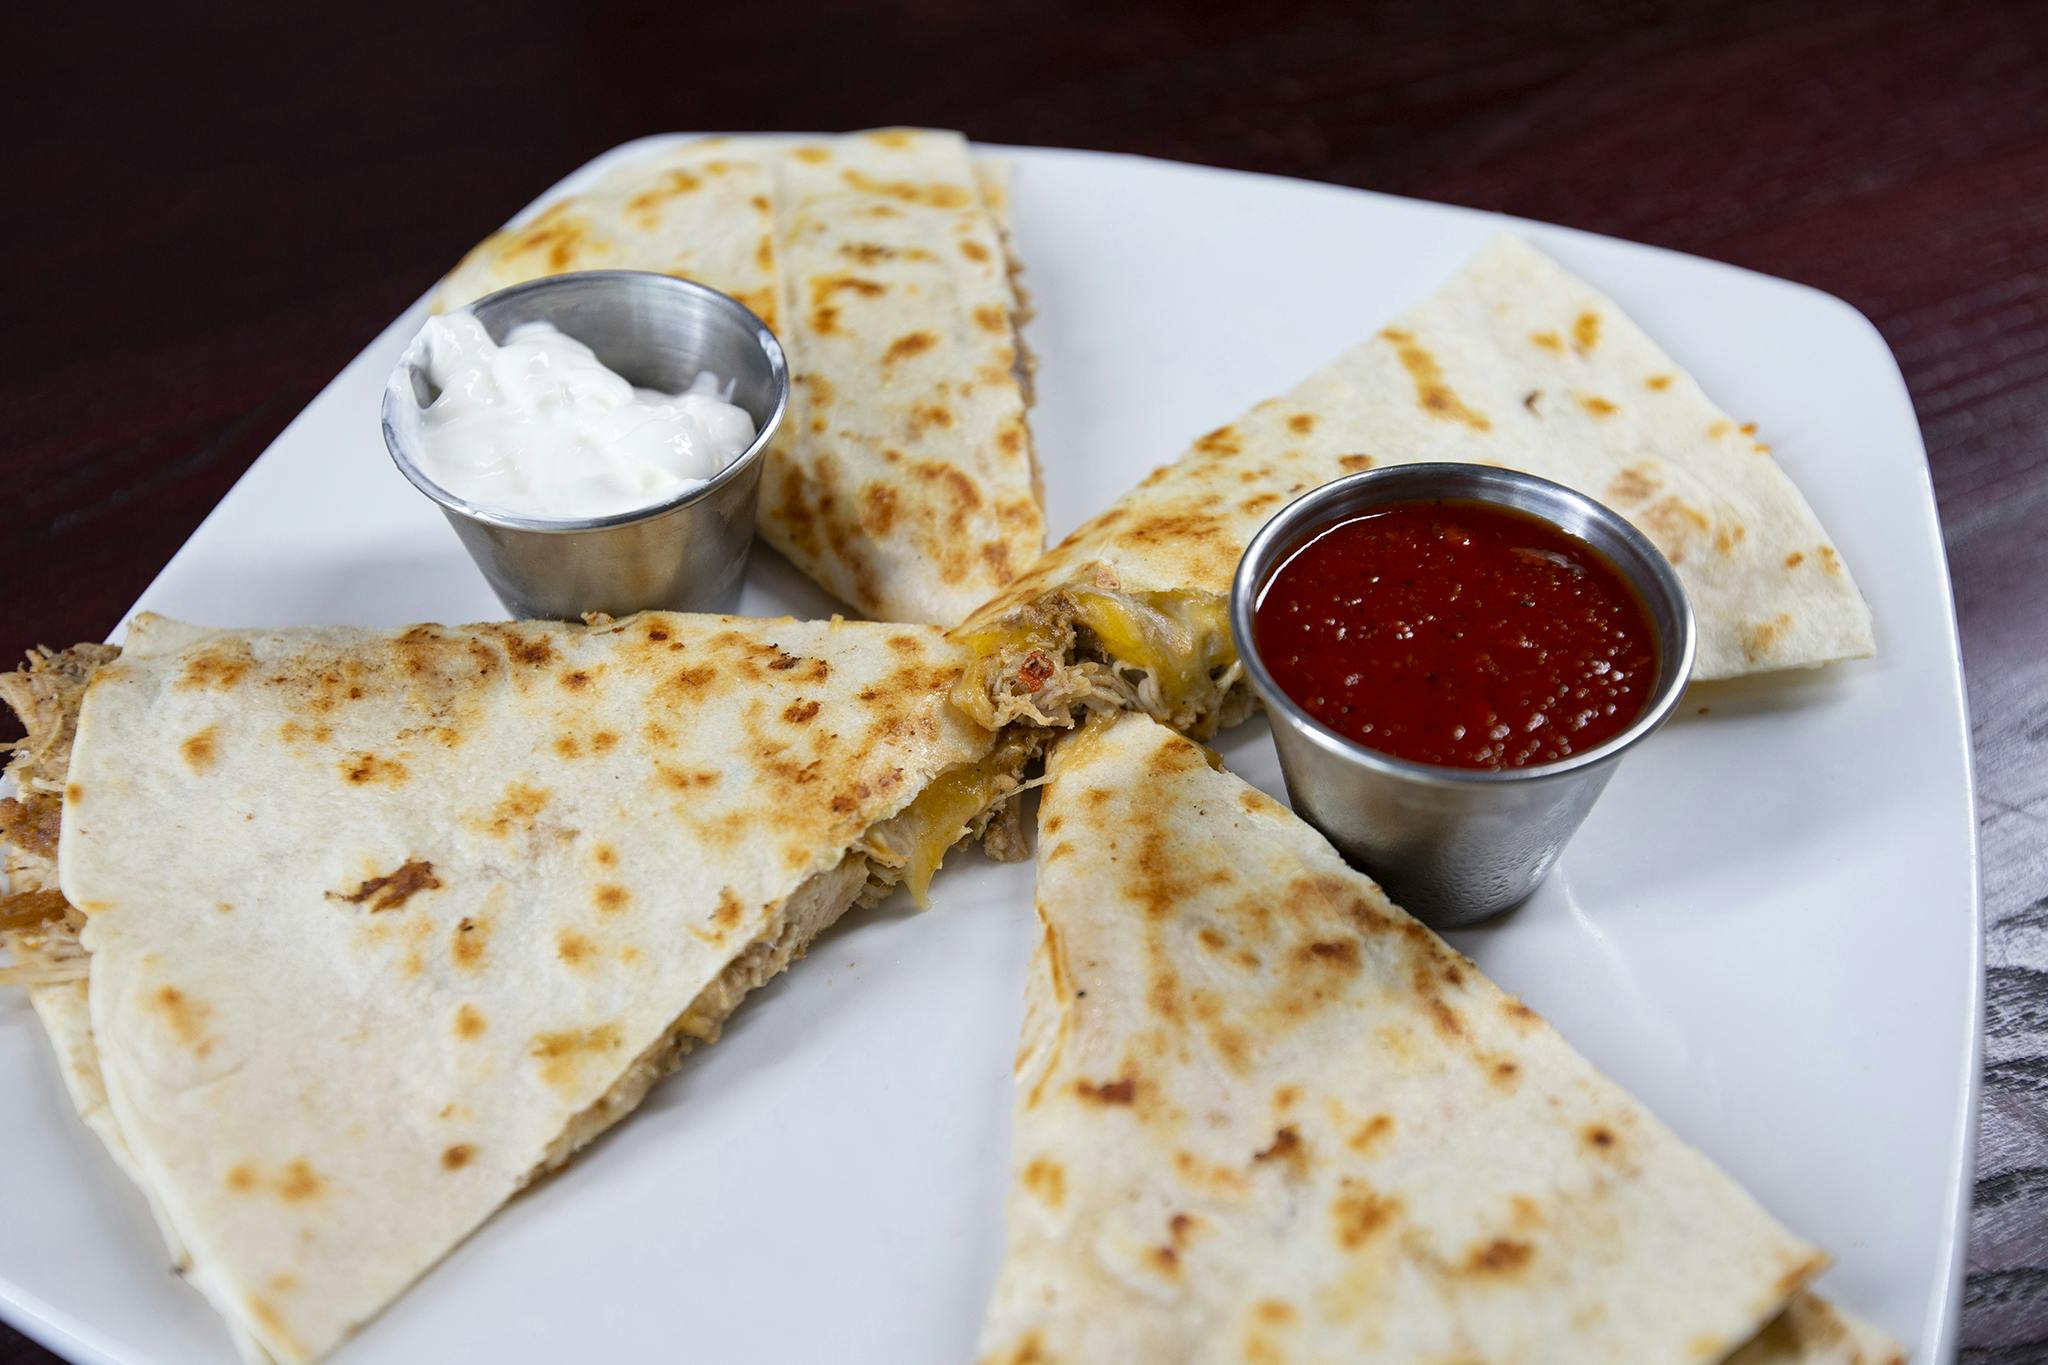 Chicken Quesadilla from Firehouse Grill - Chicago Ave in Evanston, IL